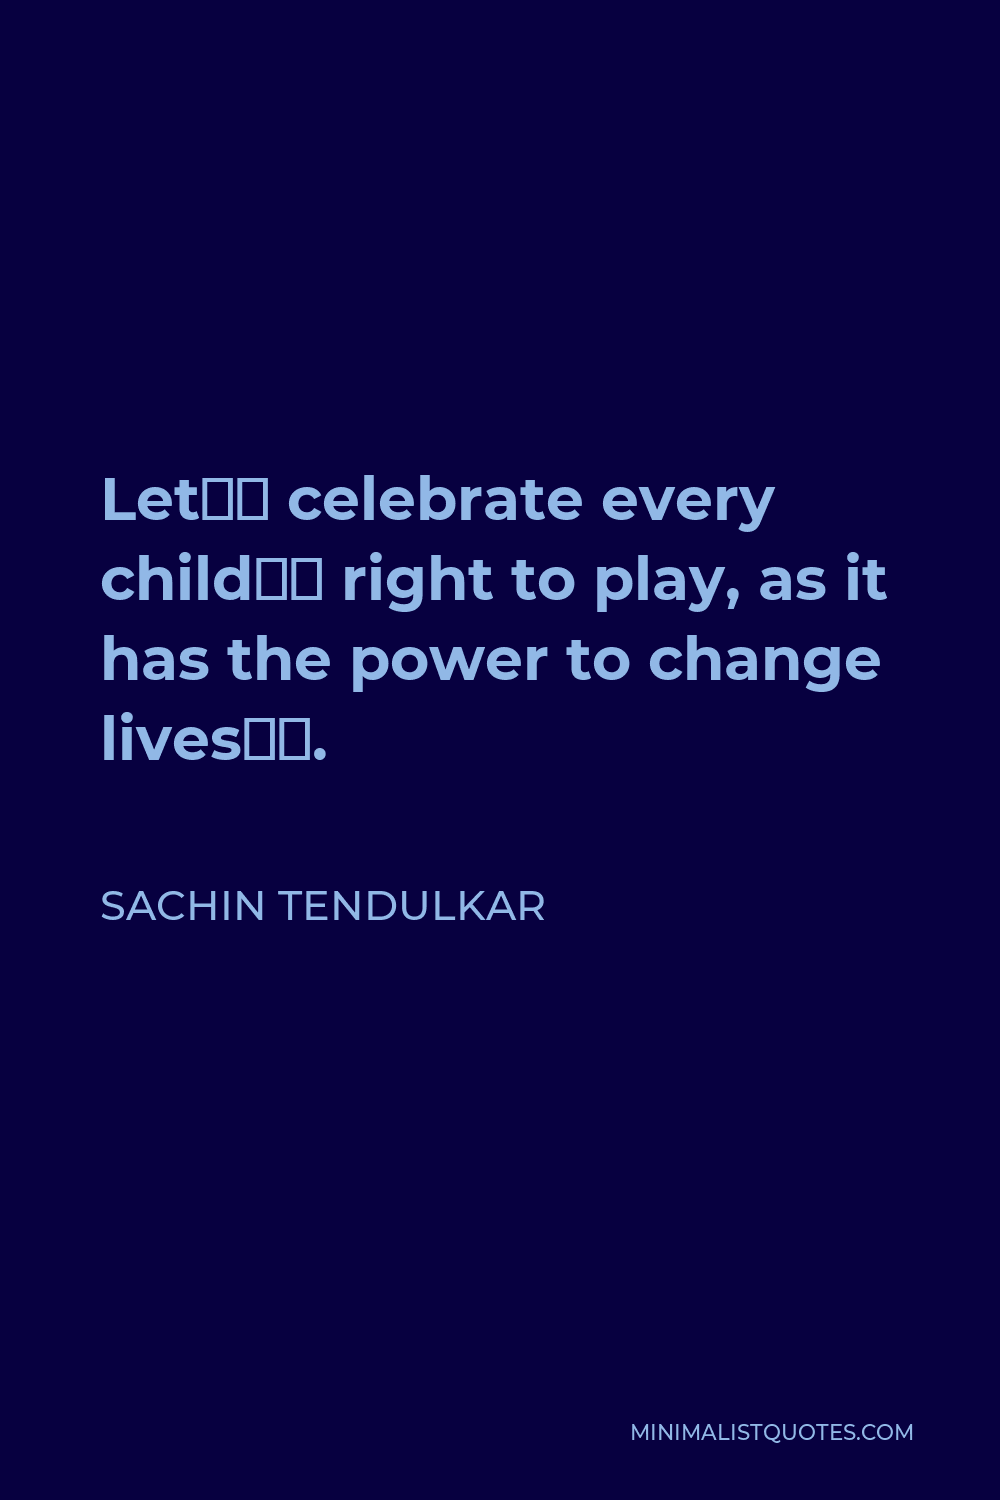 Sachin Tendulkar Quote - Let’s celebrate every child’s right to play, as it has the power to change lives‬.